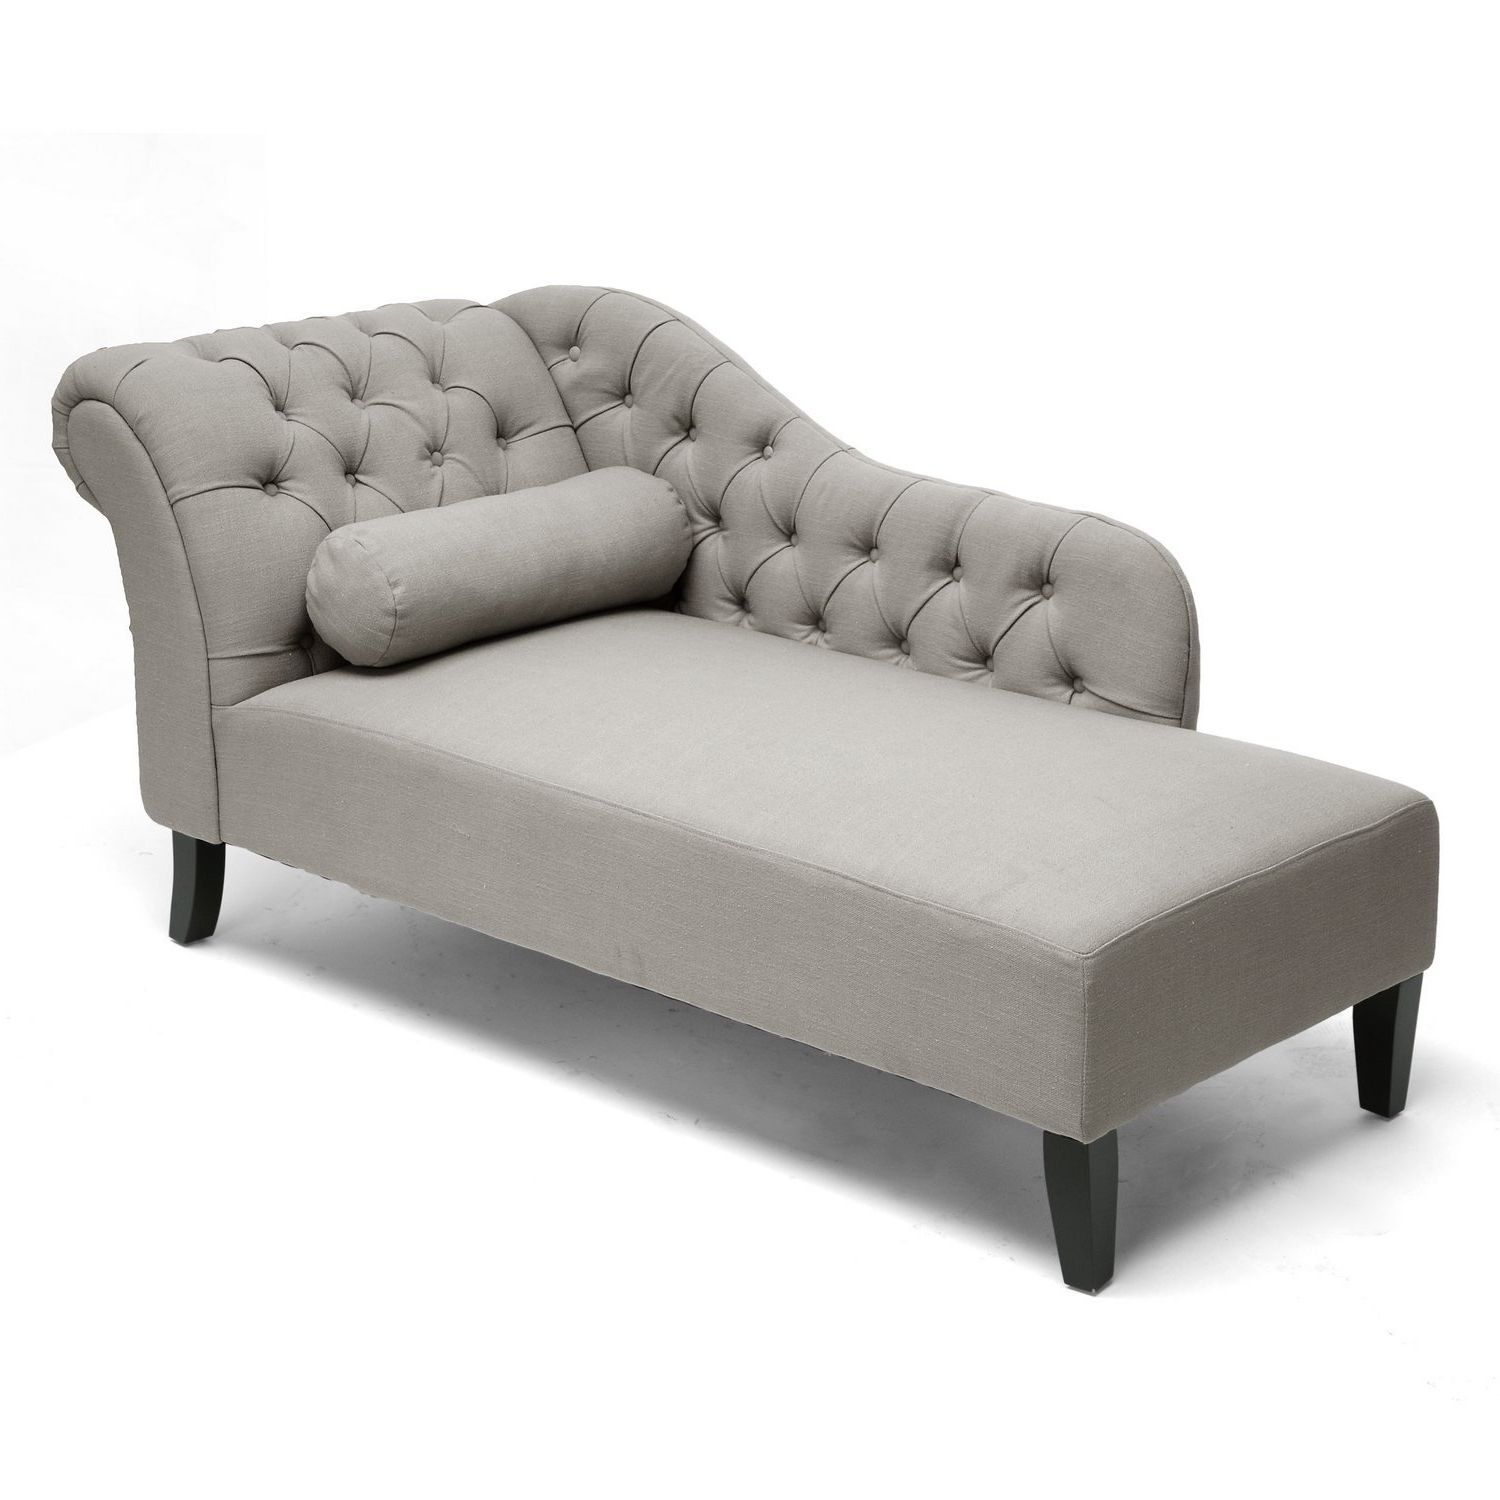 Grey Chaise Lounges With Regard To Fashionable Amazon: Baxton Studio Aphrodite Tufted Putty Linen Modern (View 2 of 15)